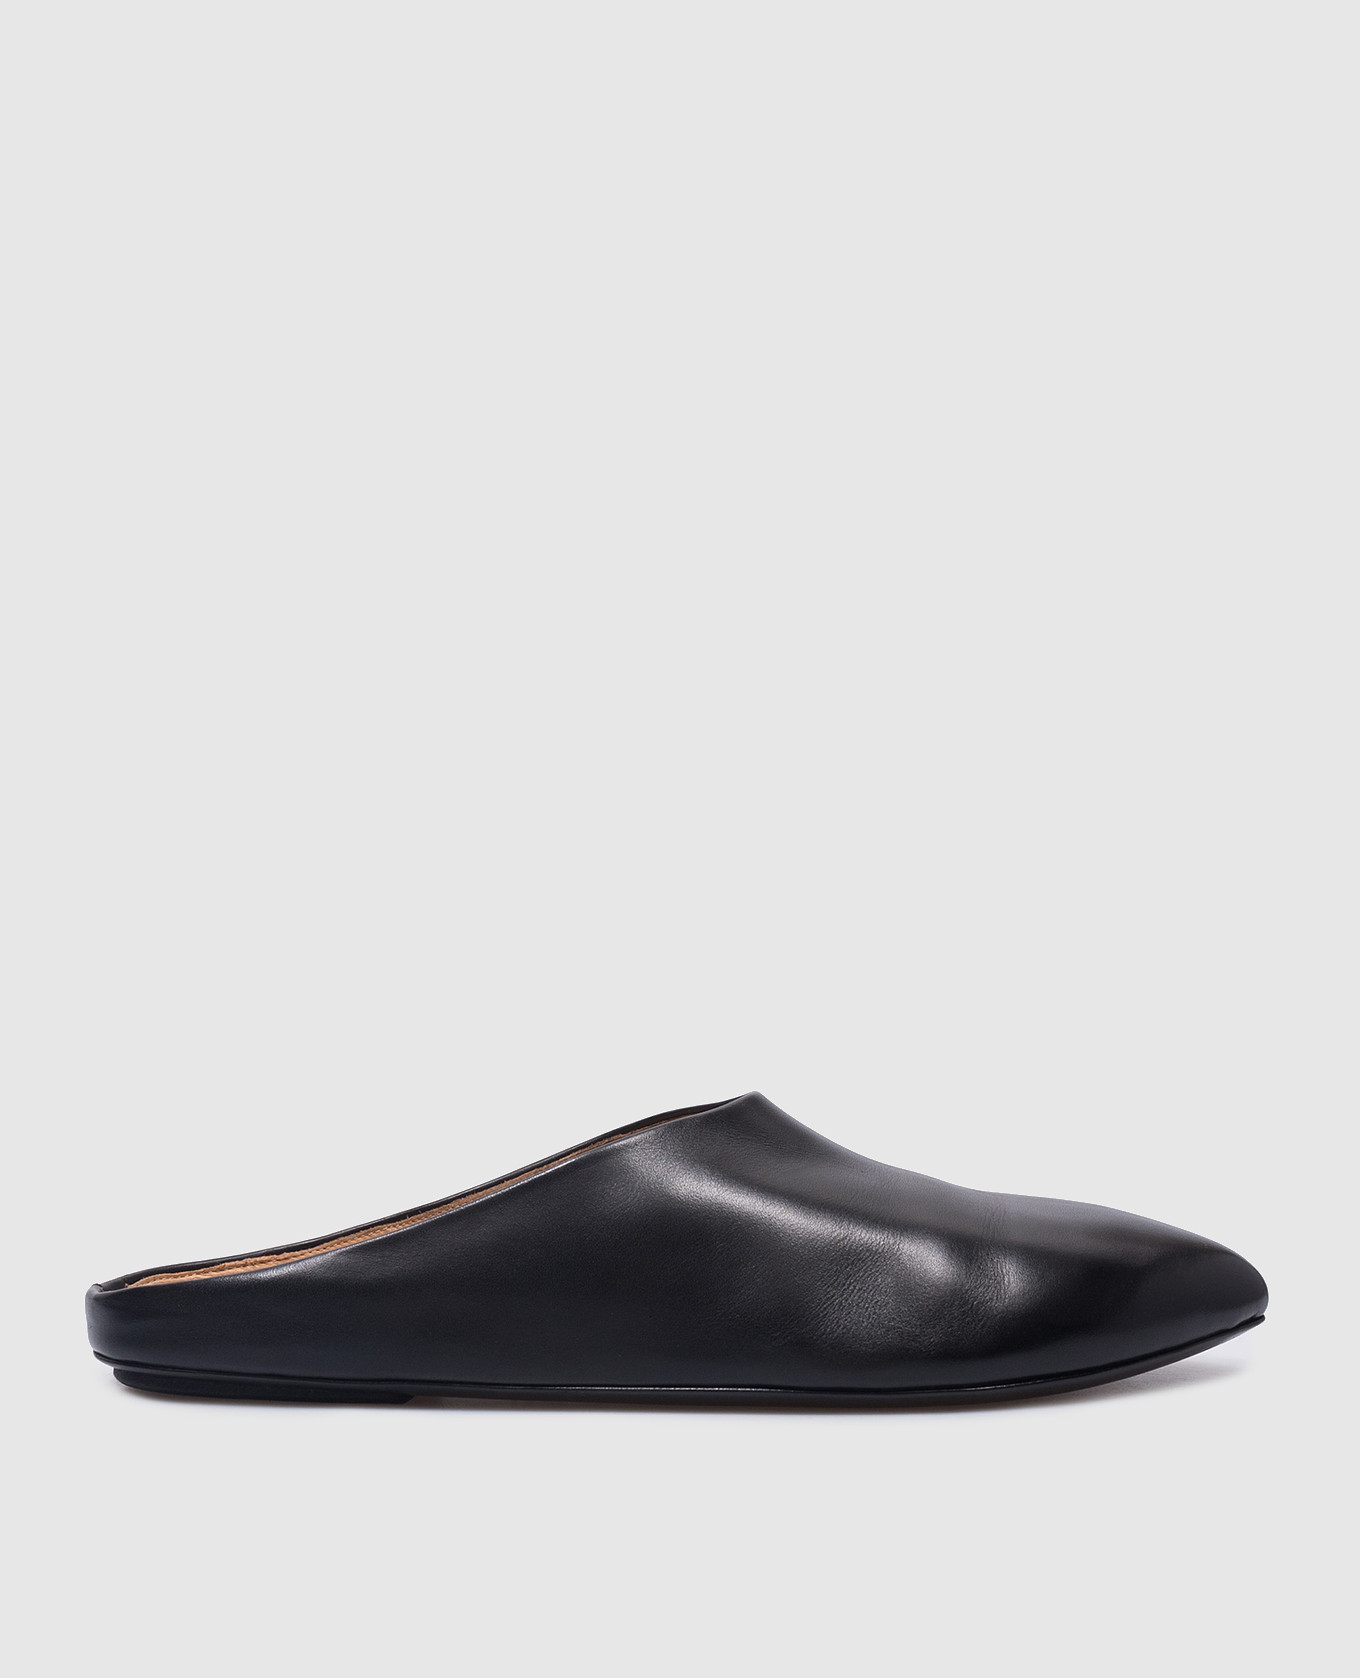 Noce black leather mules